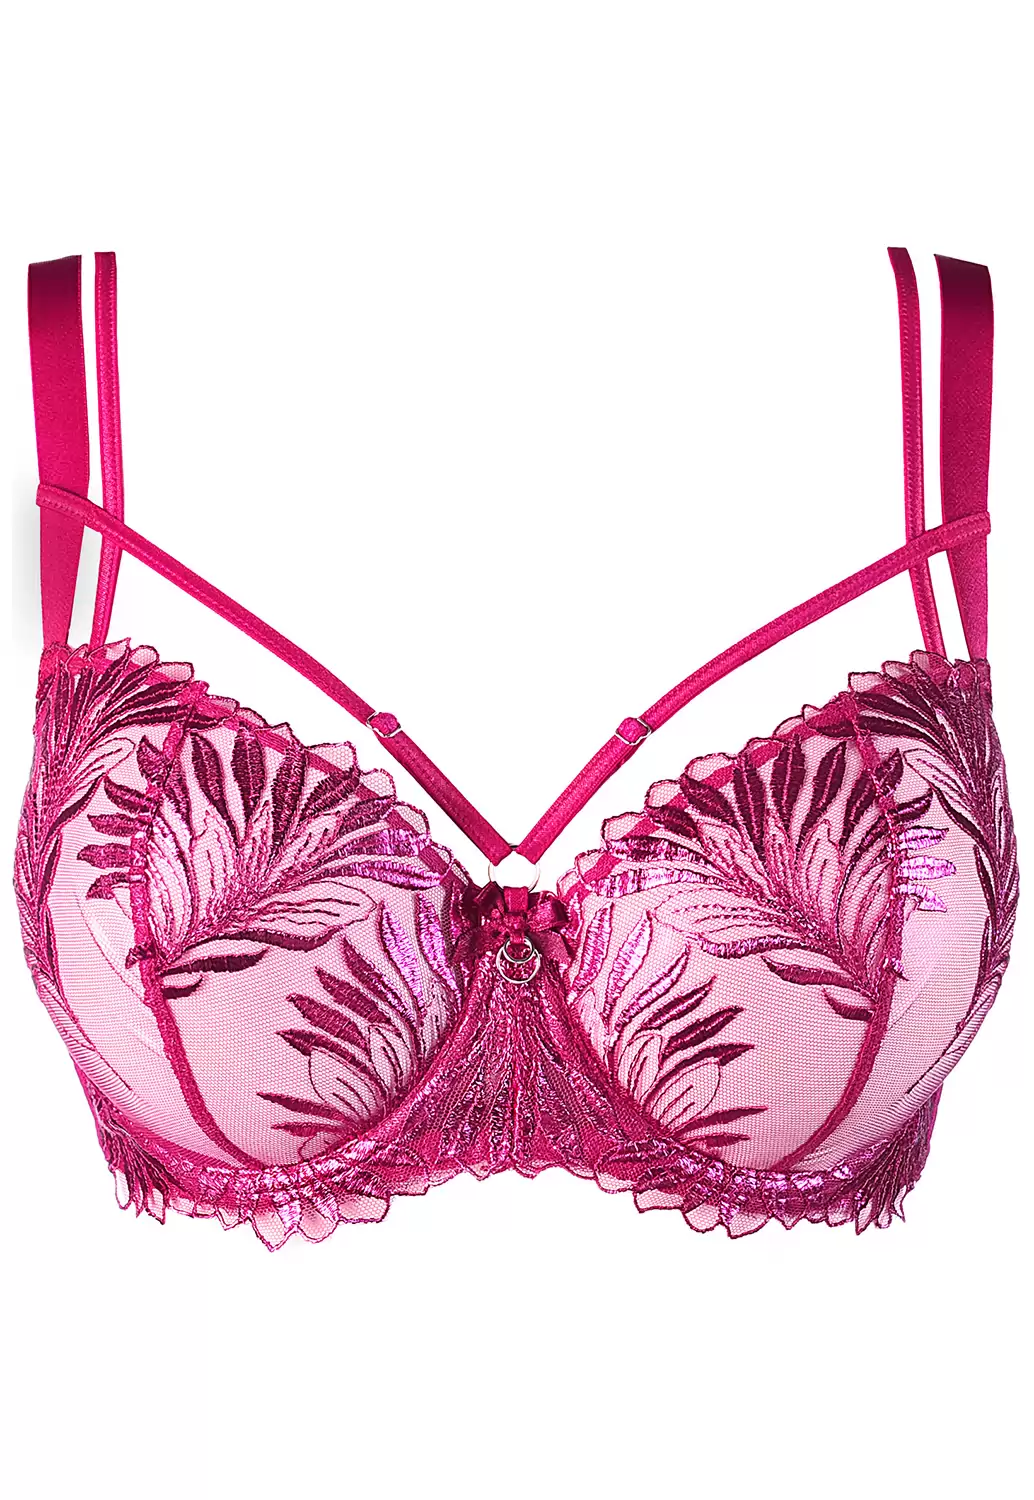 Embroidered pink Bra